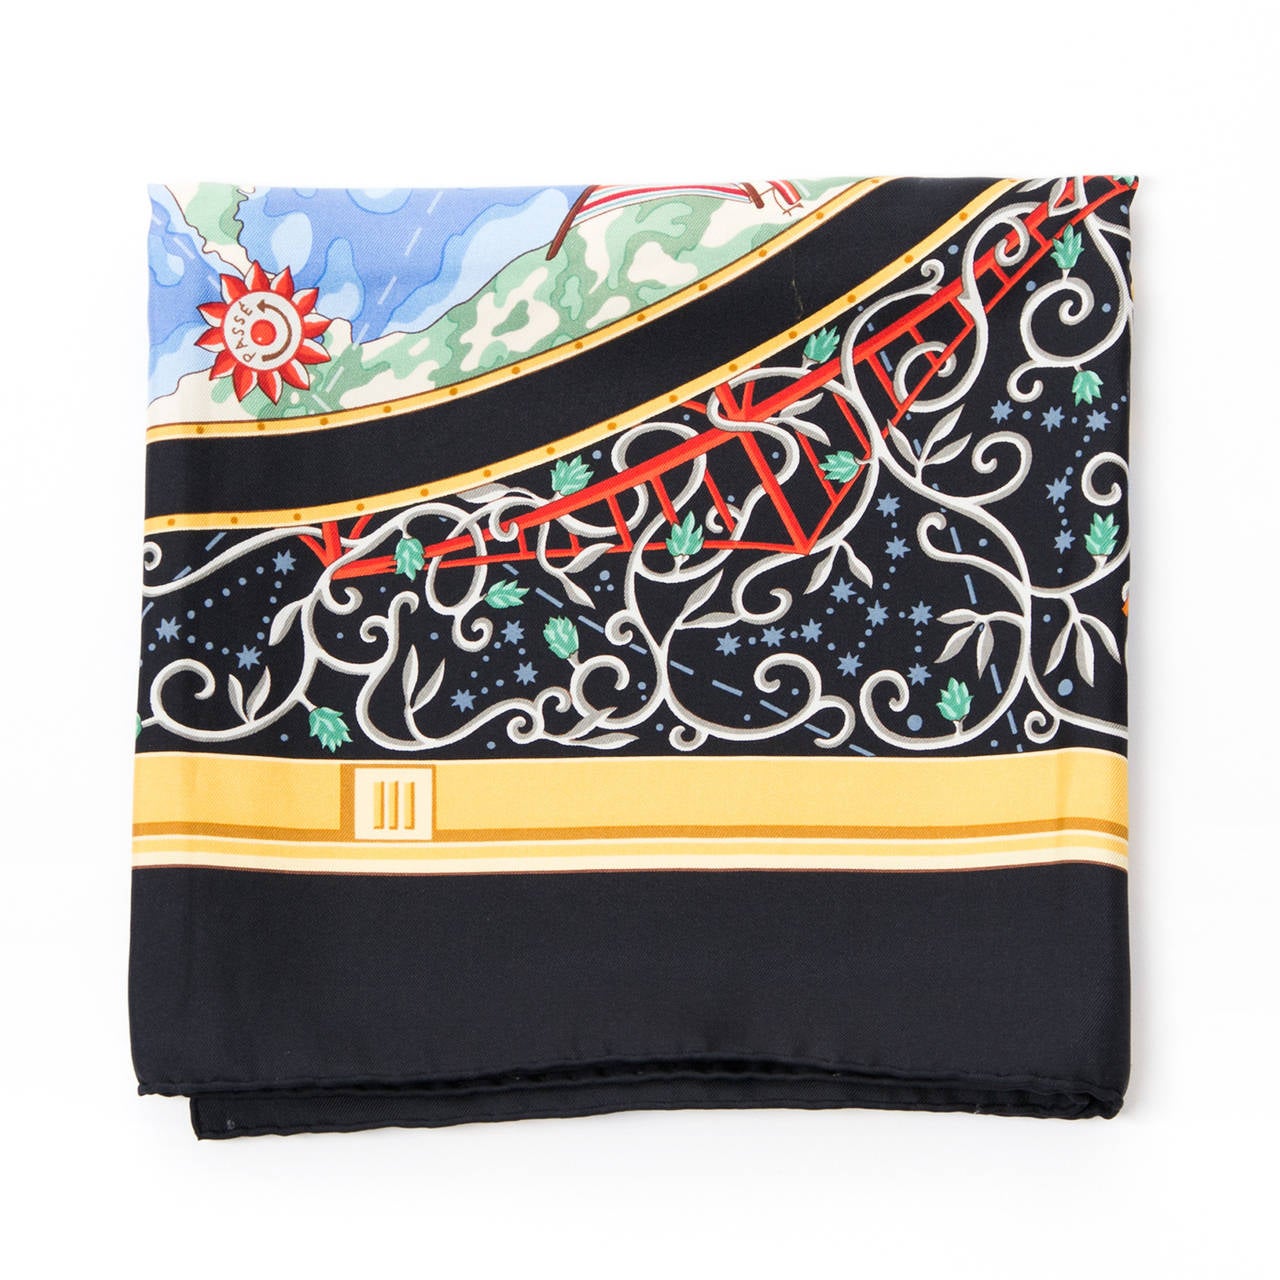 This authentic Hermès Silk Worldmap Scarf is made out of 100% silk and features a bright graphic design of a worldmap. This is a perfect scarf to be worn in different stylish ways.